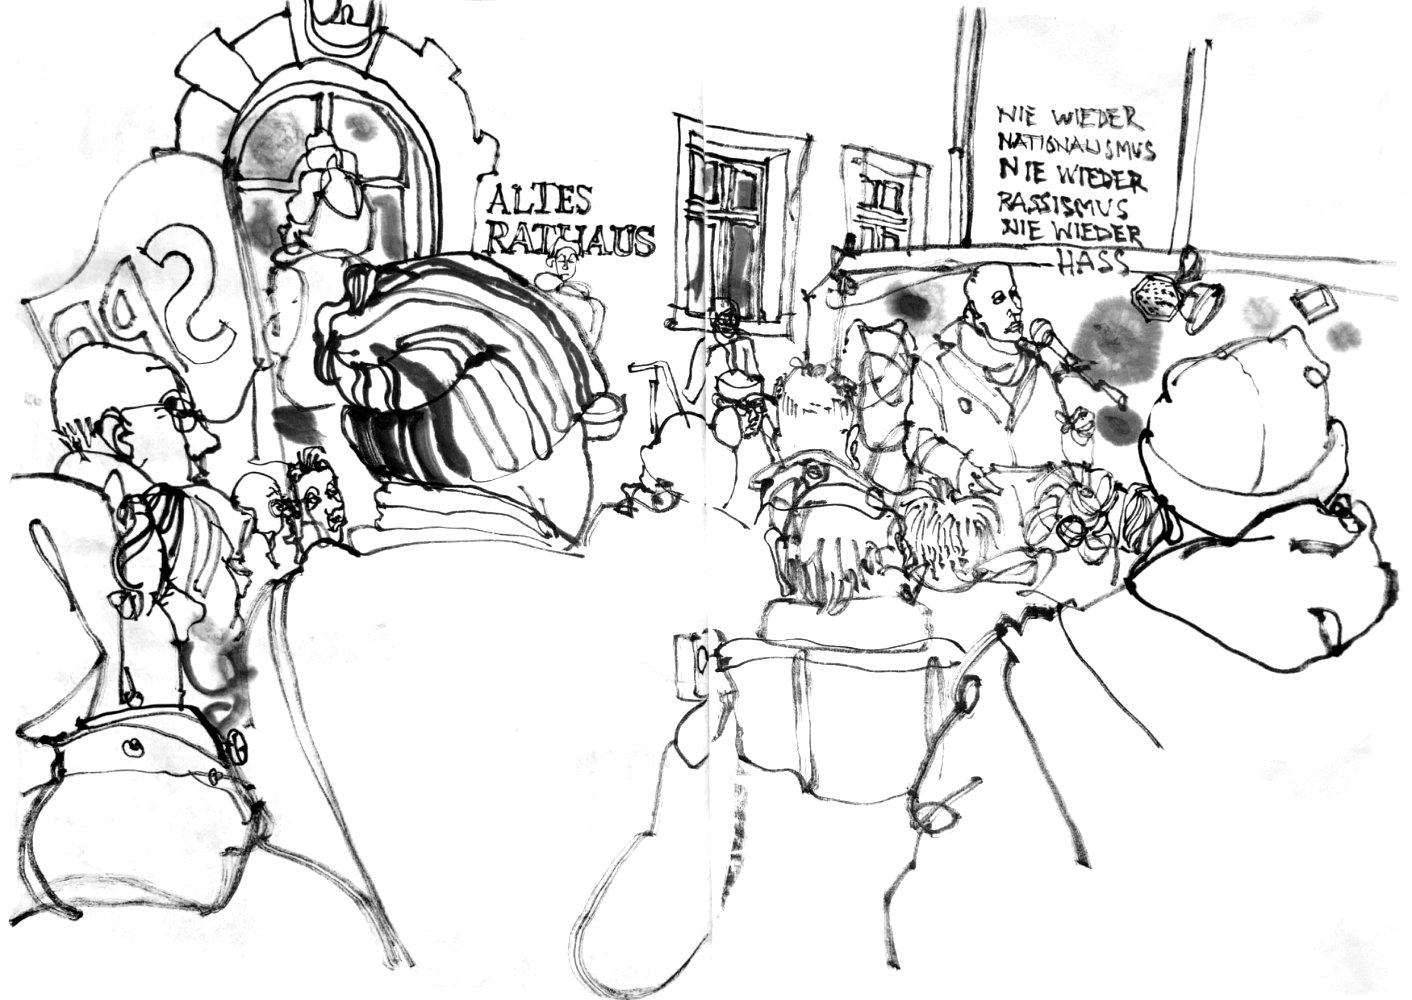 ink drawing from a protest against the right 